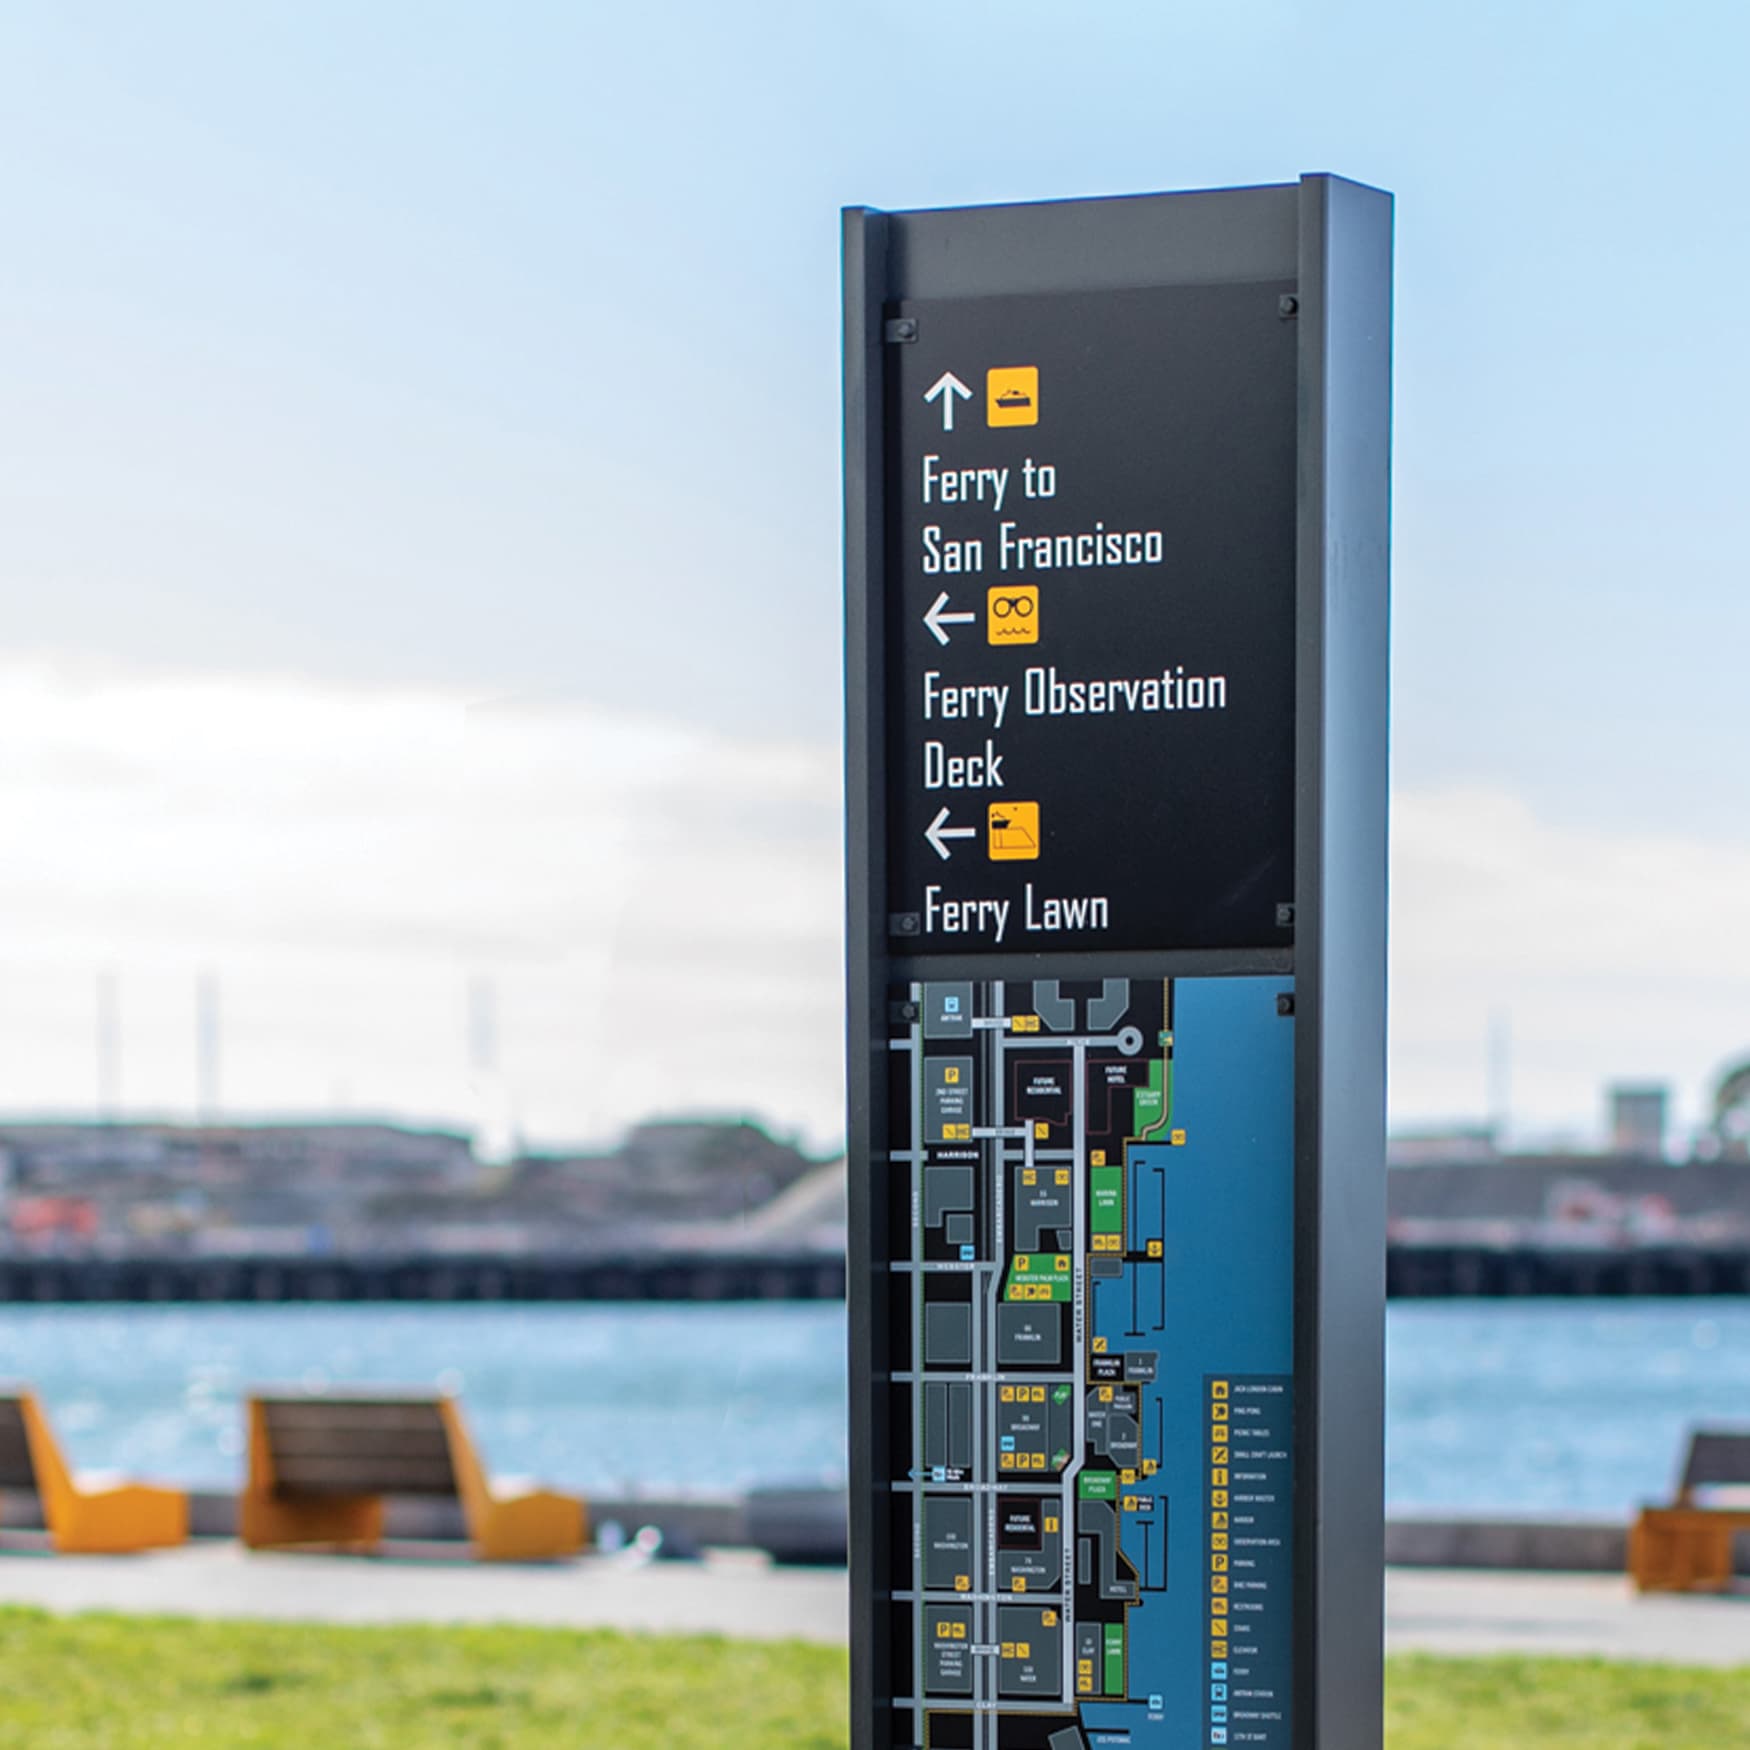 Waterfront Wayfinding Signage with Oakland Harbor and waterfront seating in the background